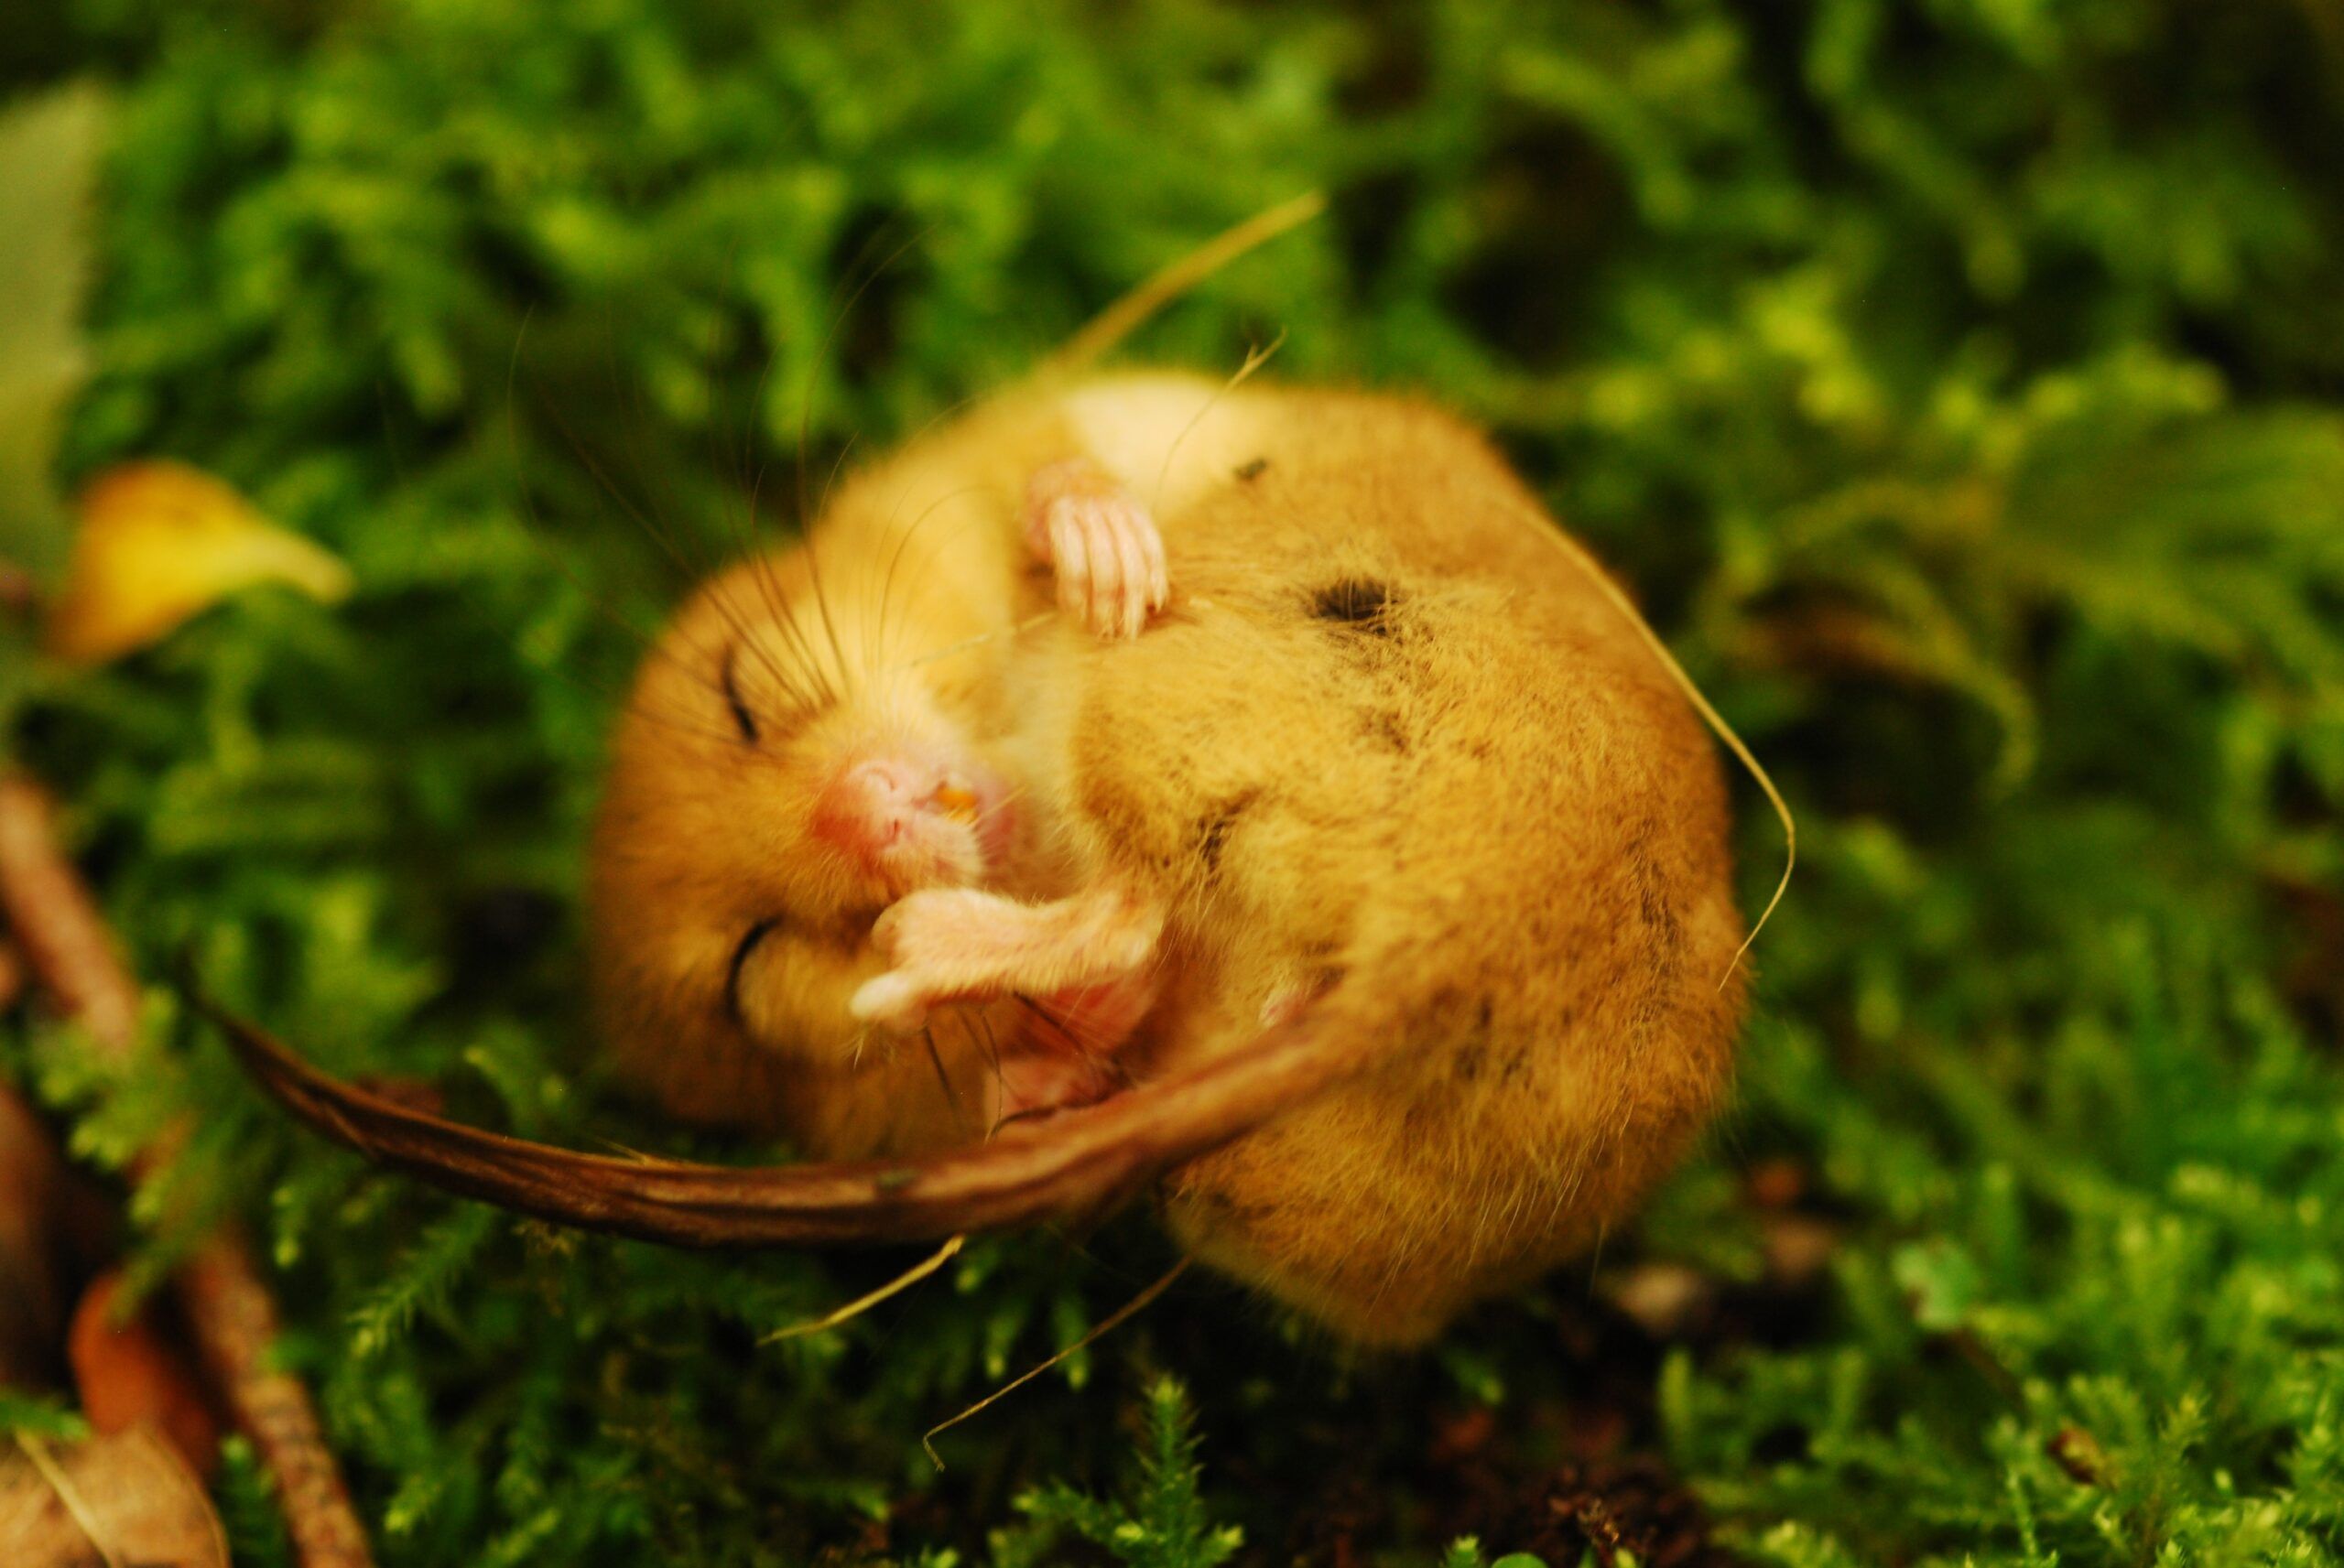 Dormouse torpid, credit Lorna Griffiths